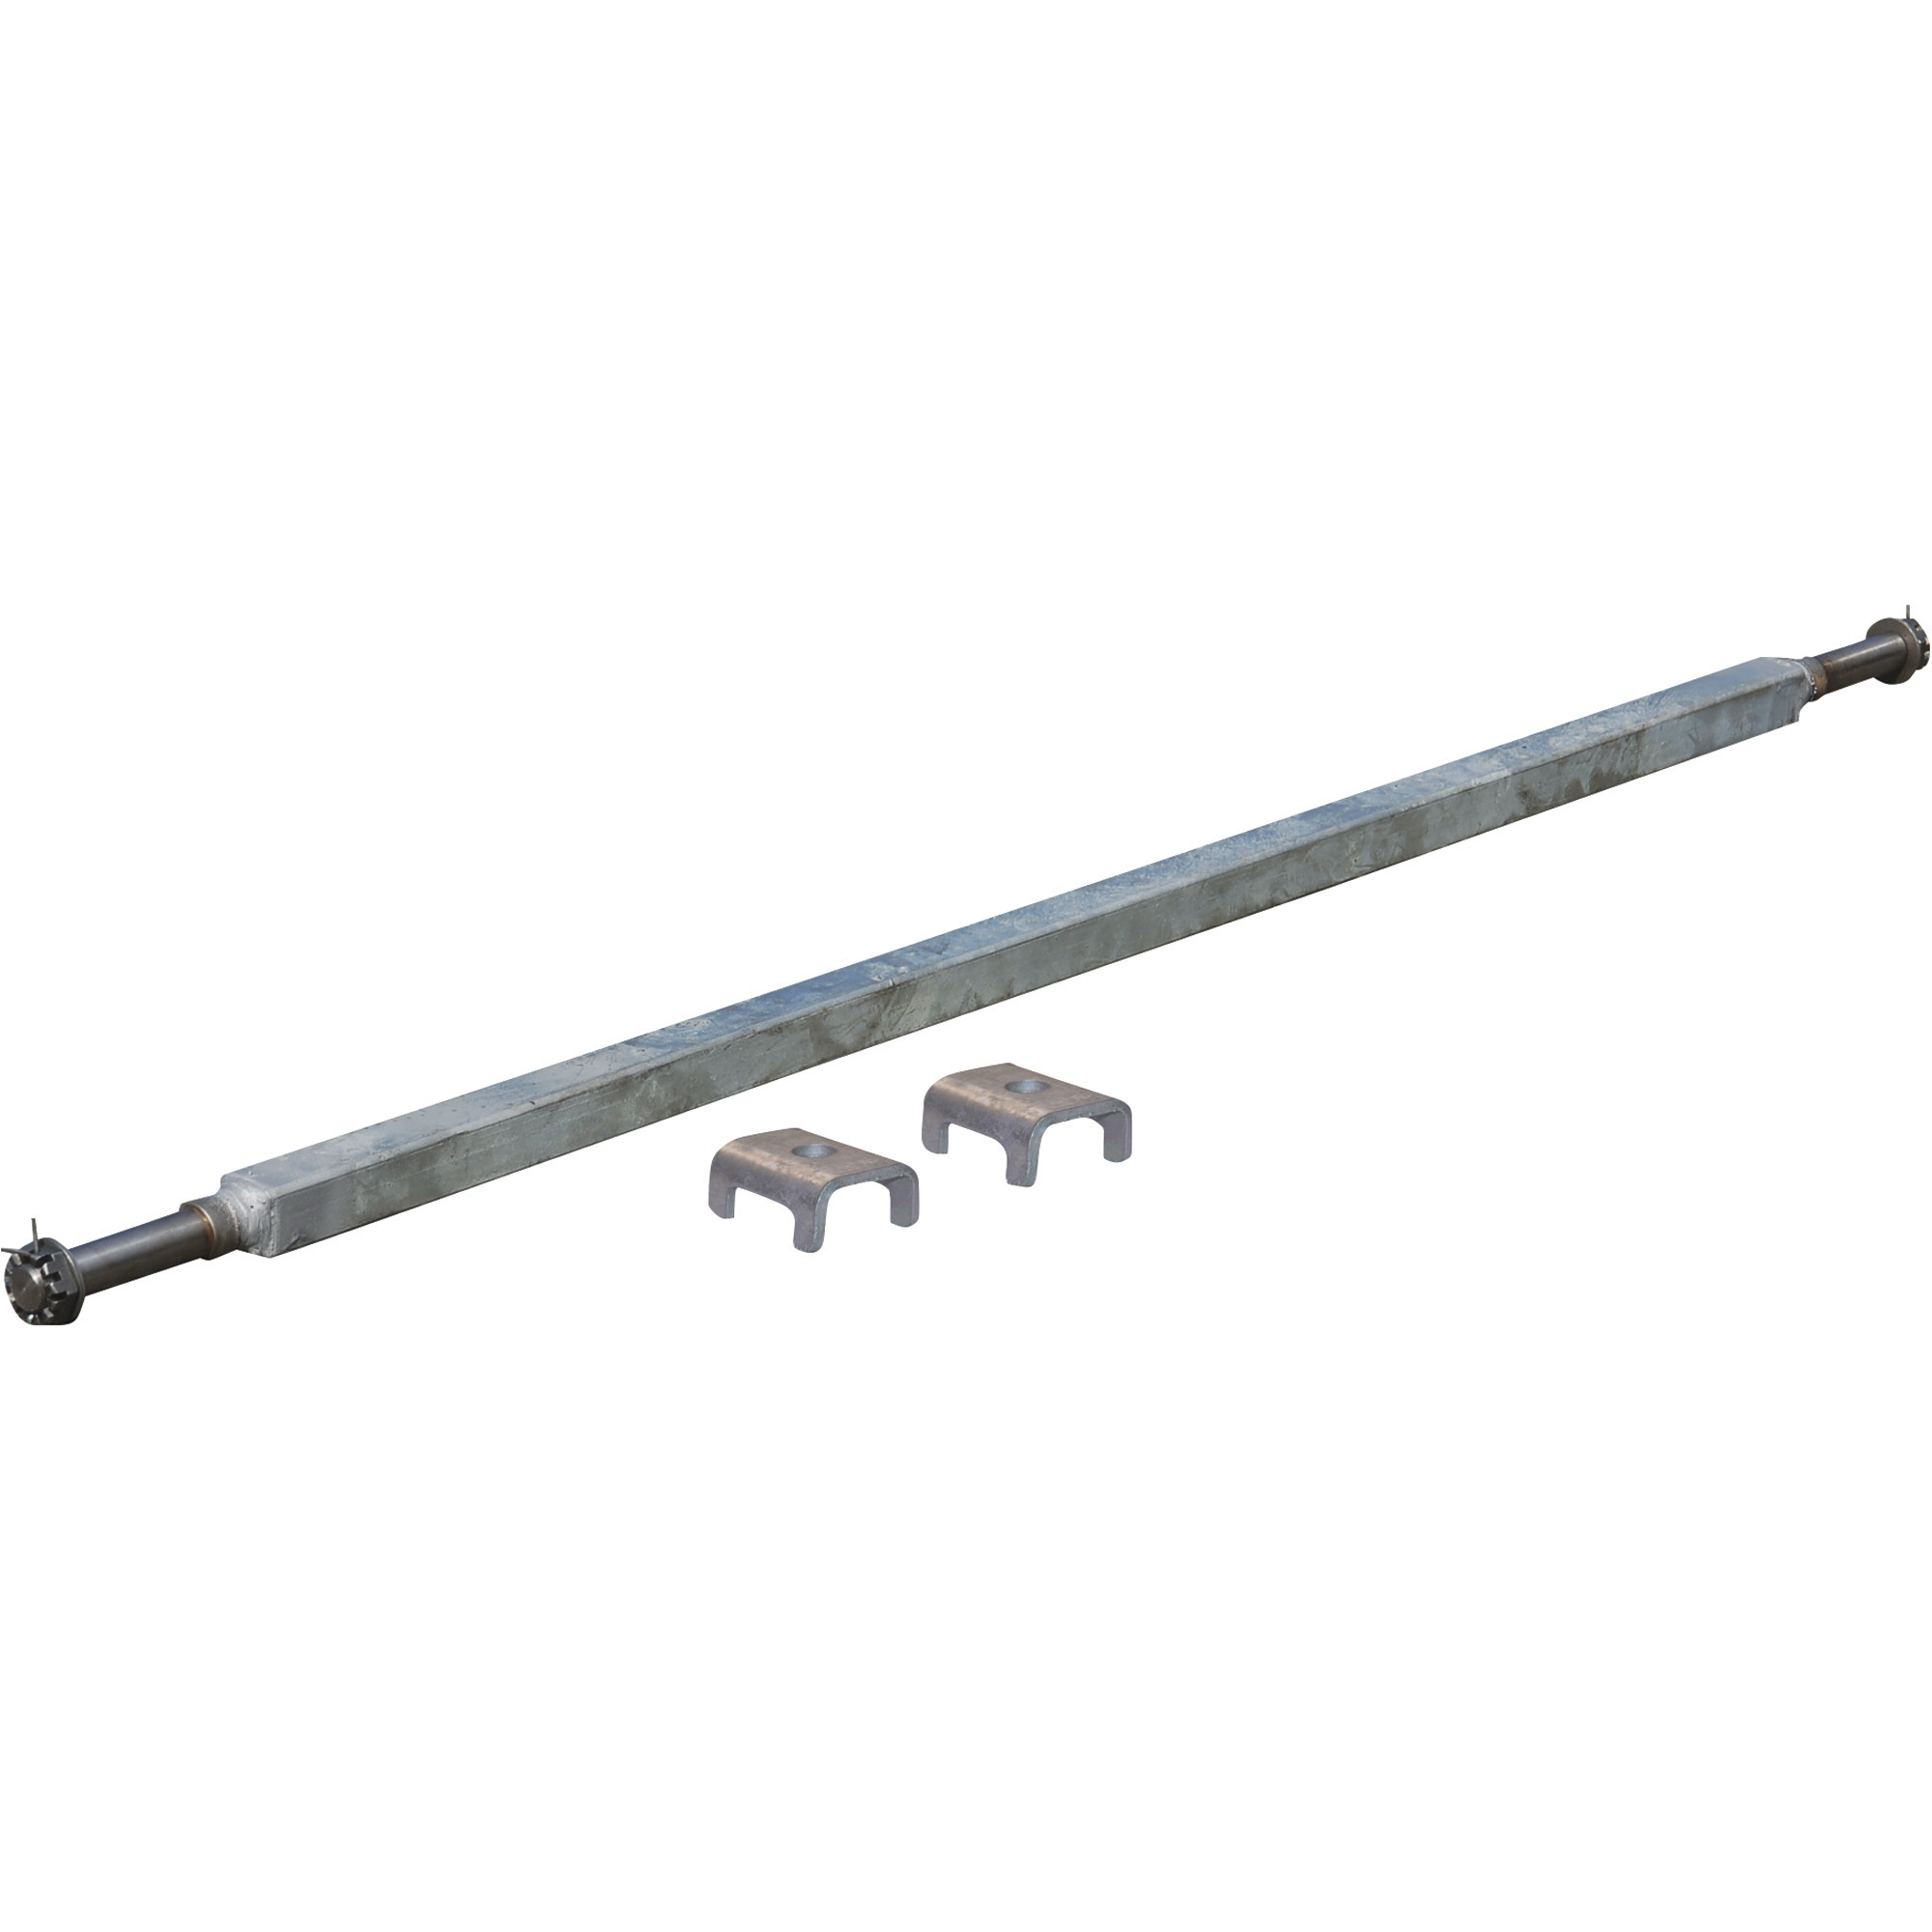 Ultra-Tow 2000-Lb. Capacity Spring Trailer Axle with Adjustable Spring Mounts, 71Inch Hubface, 55Inch-61Inch Spring Center, 76Inch L, Straight